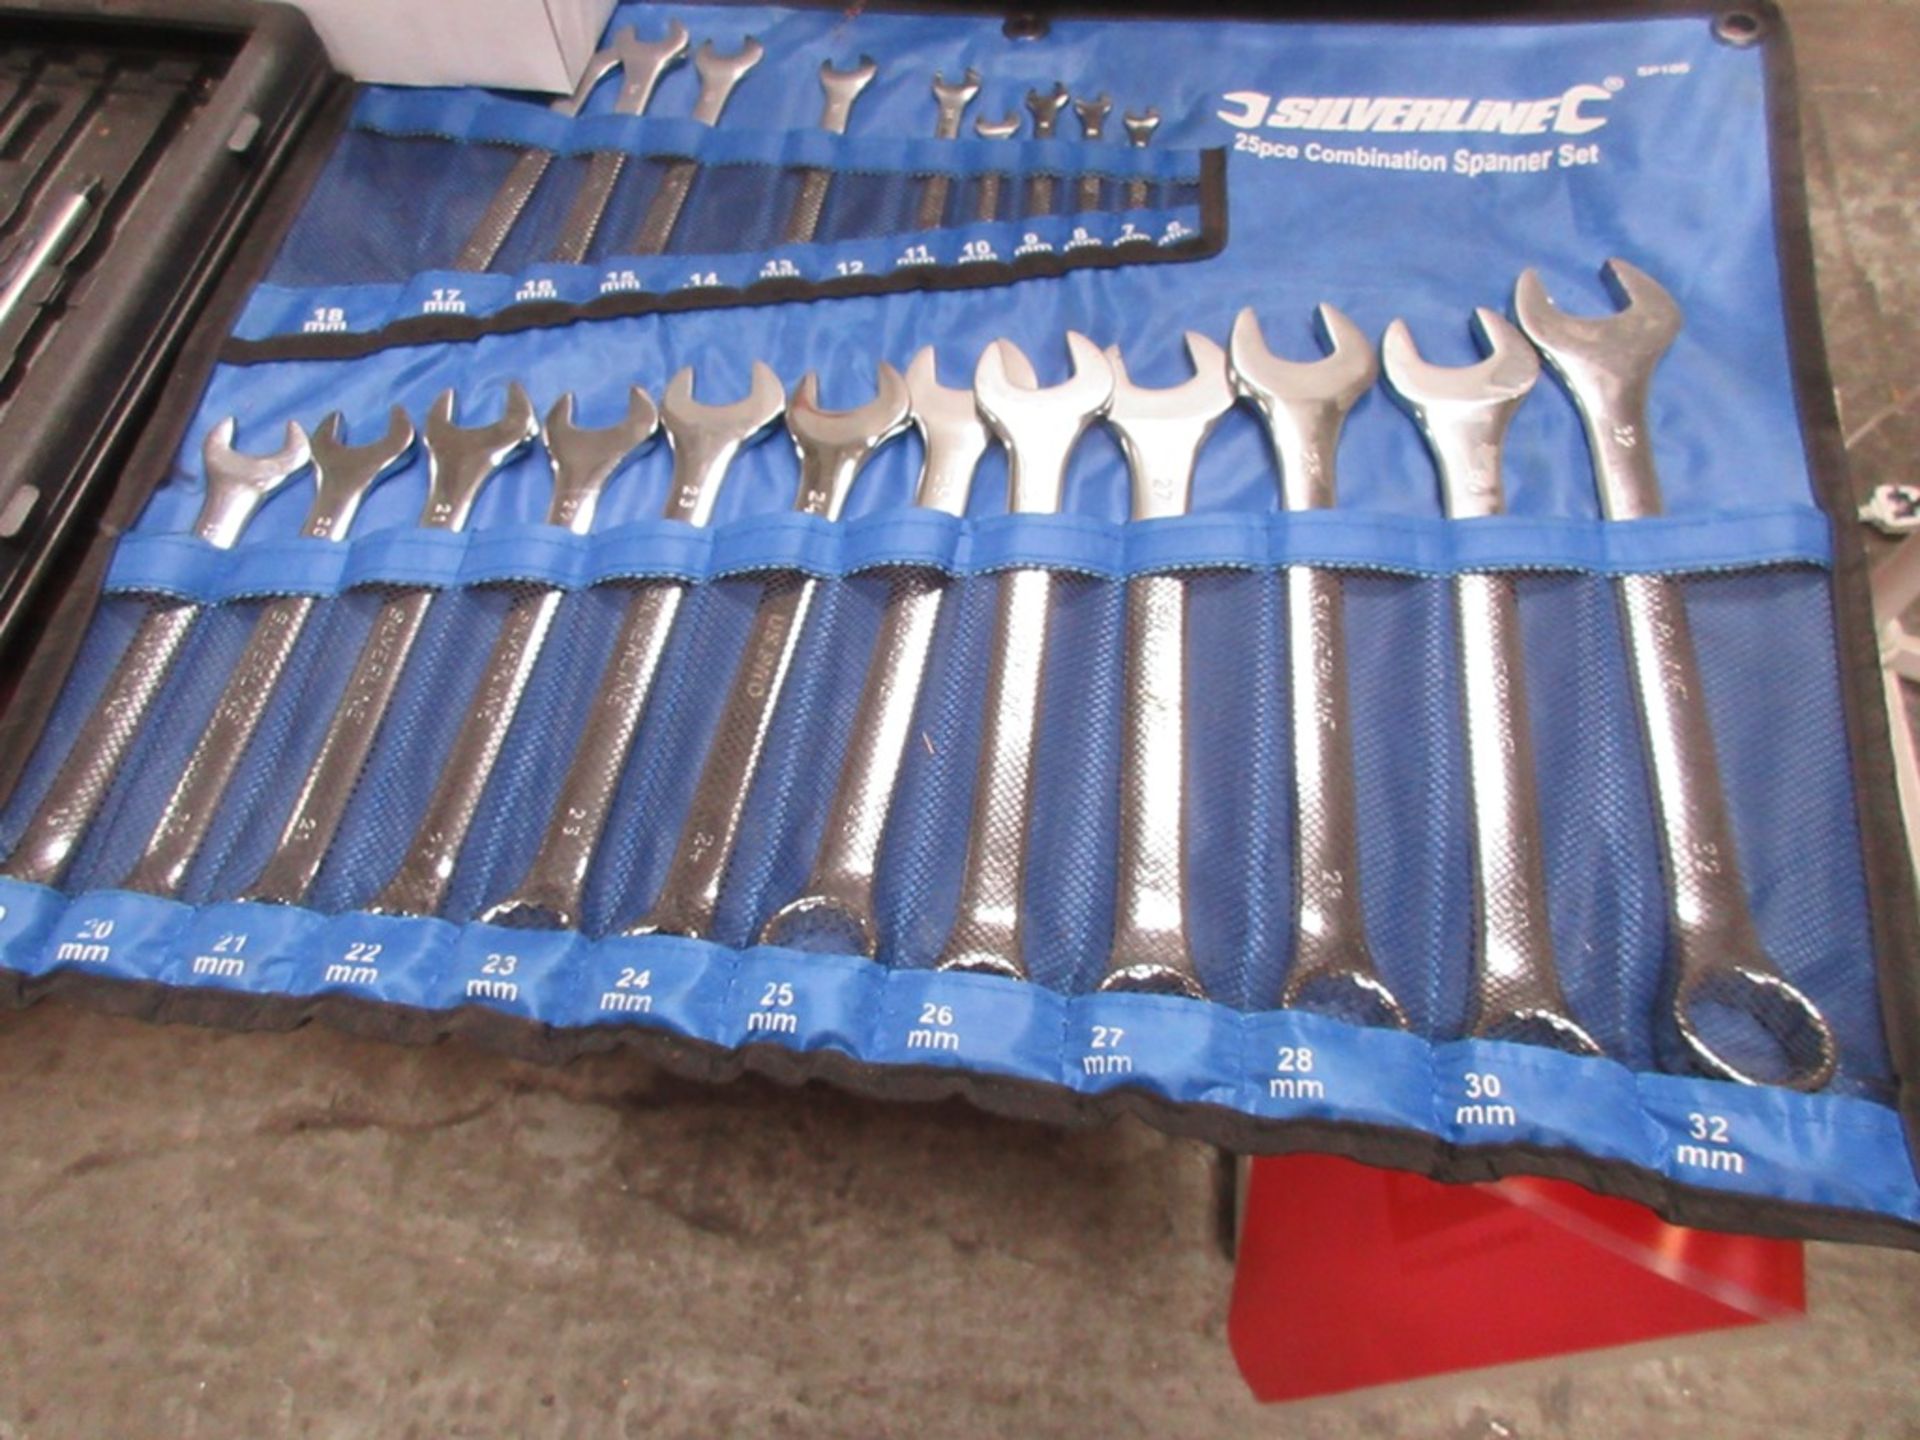 Assorted hand tools including spanners, screwdrivers, grease guns, Torx, etc. - Image 3 of 4